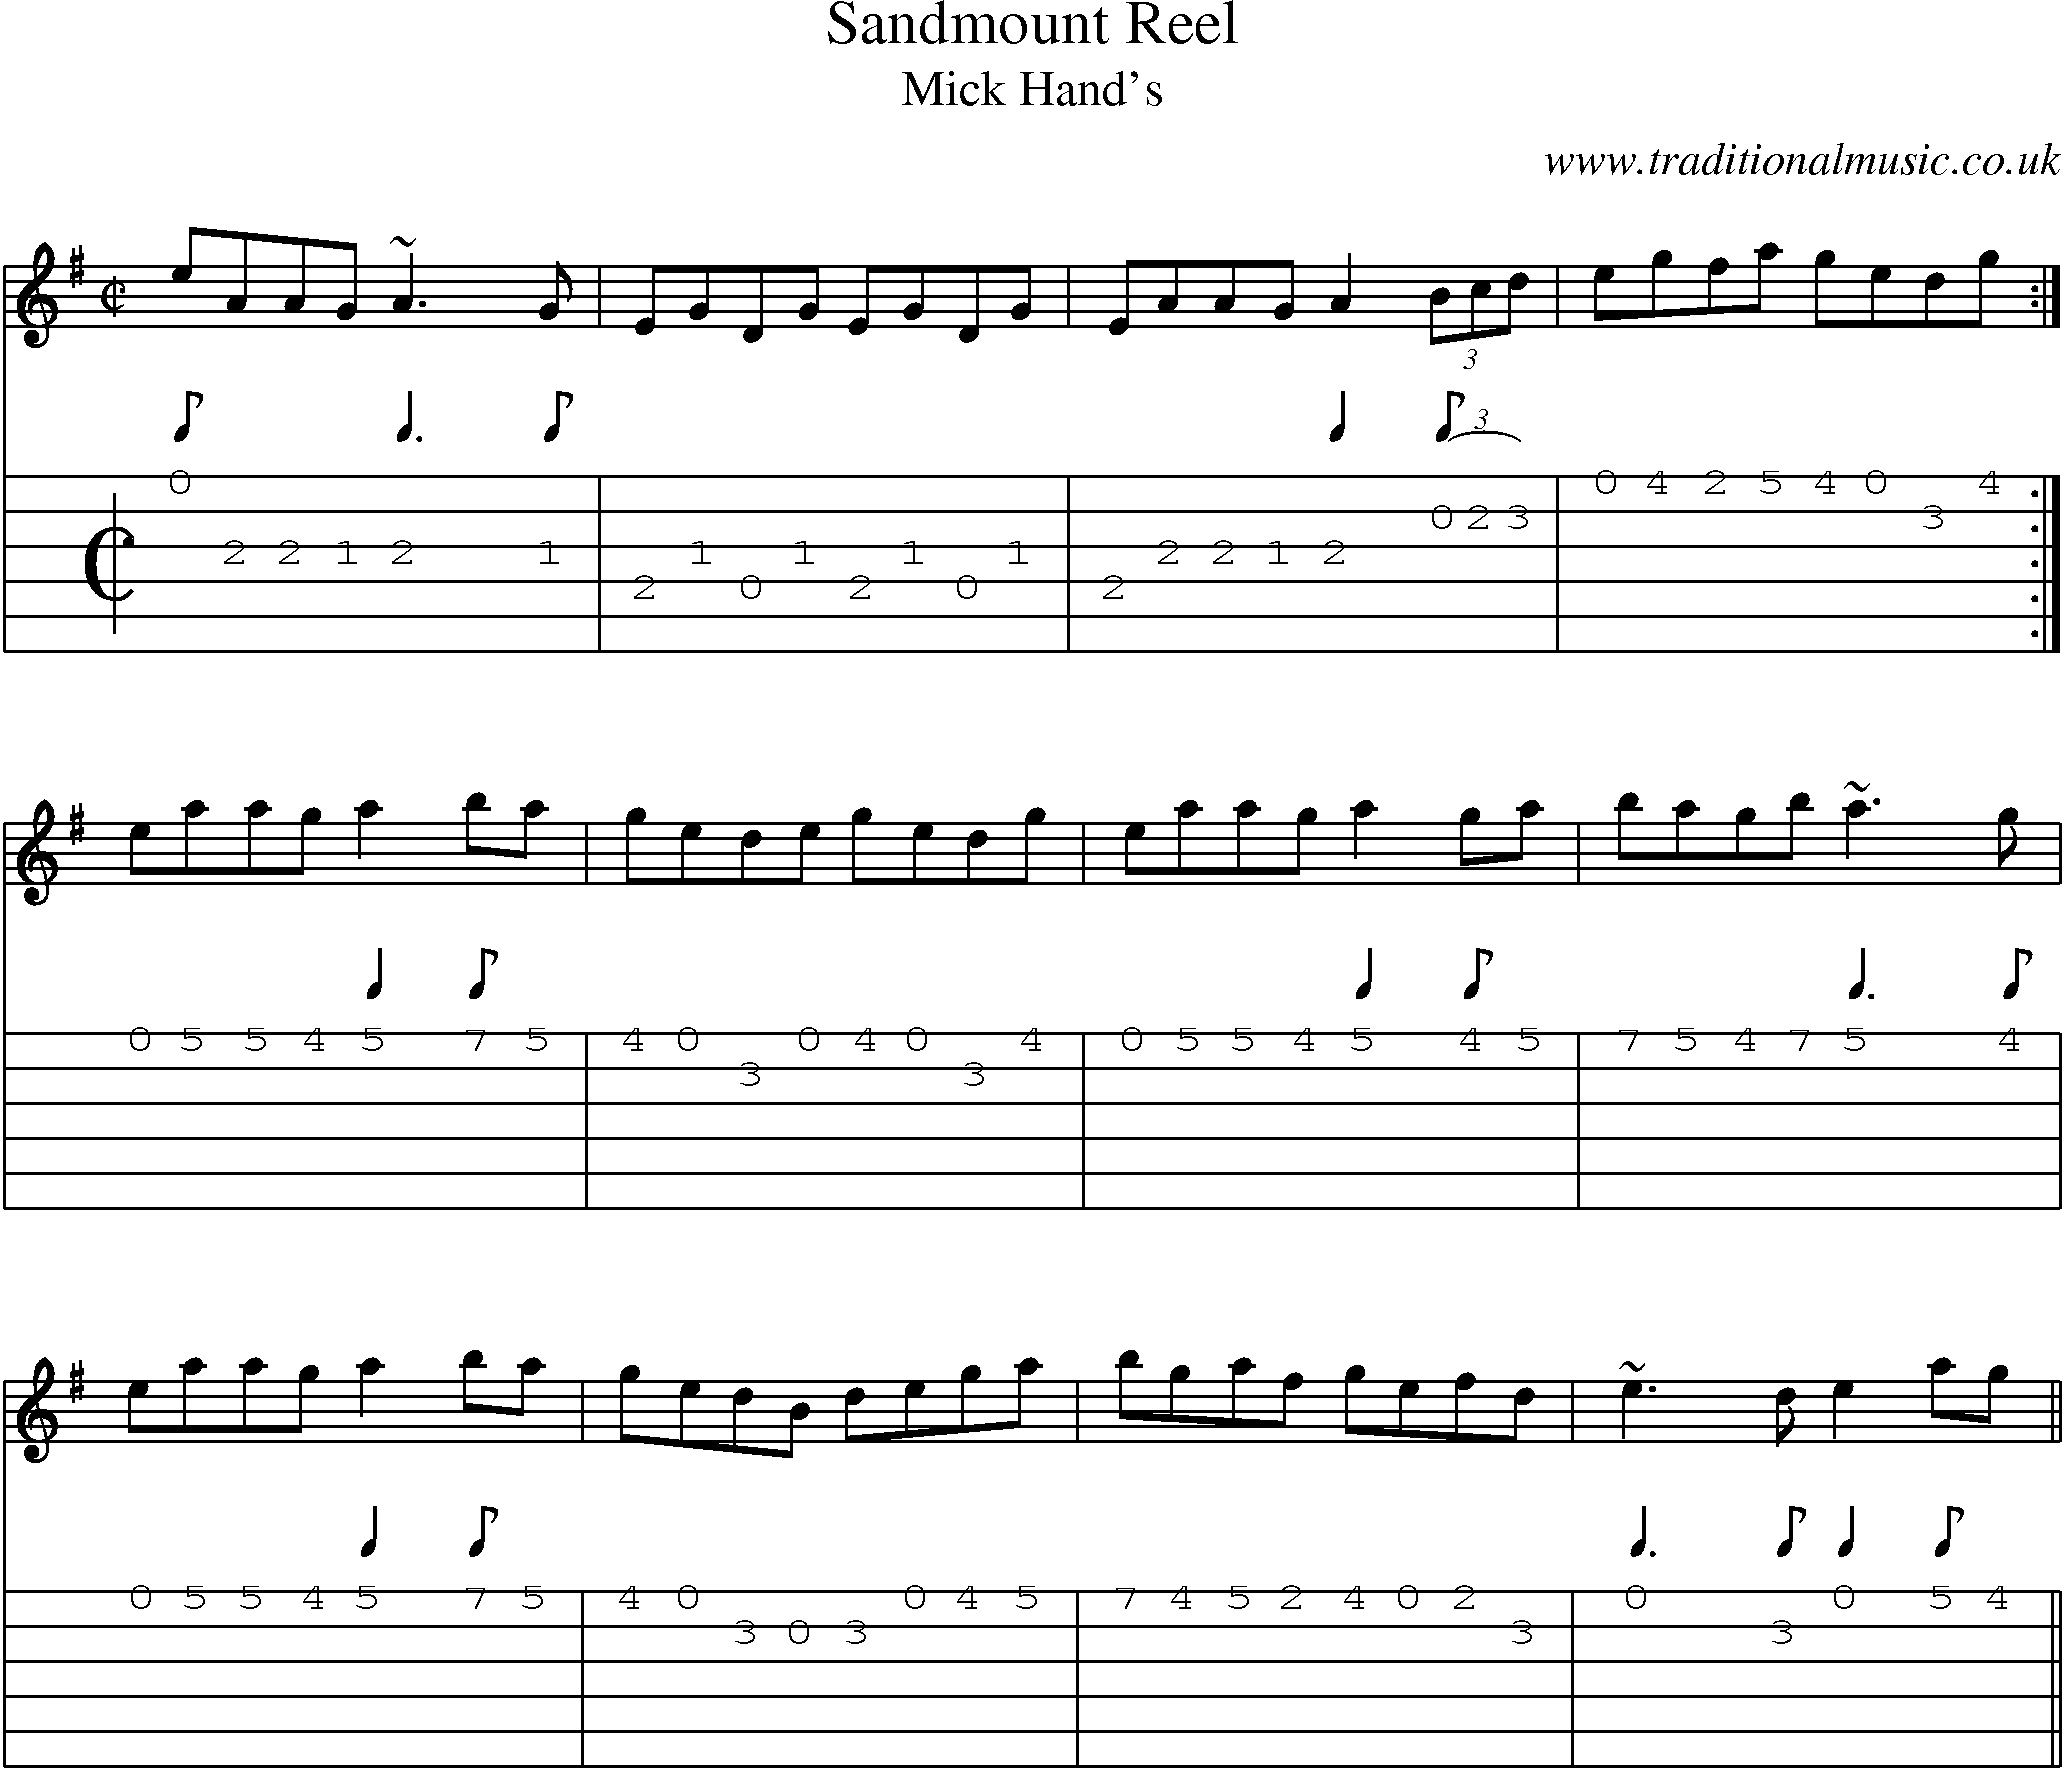 Music Score and Guitar Tabs for Sandmount Reel